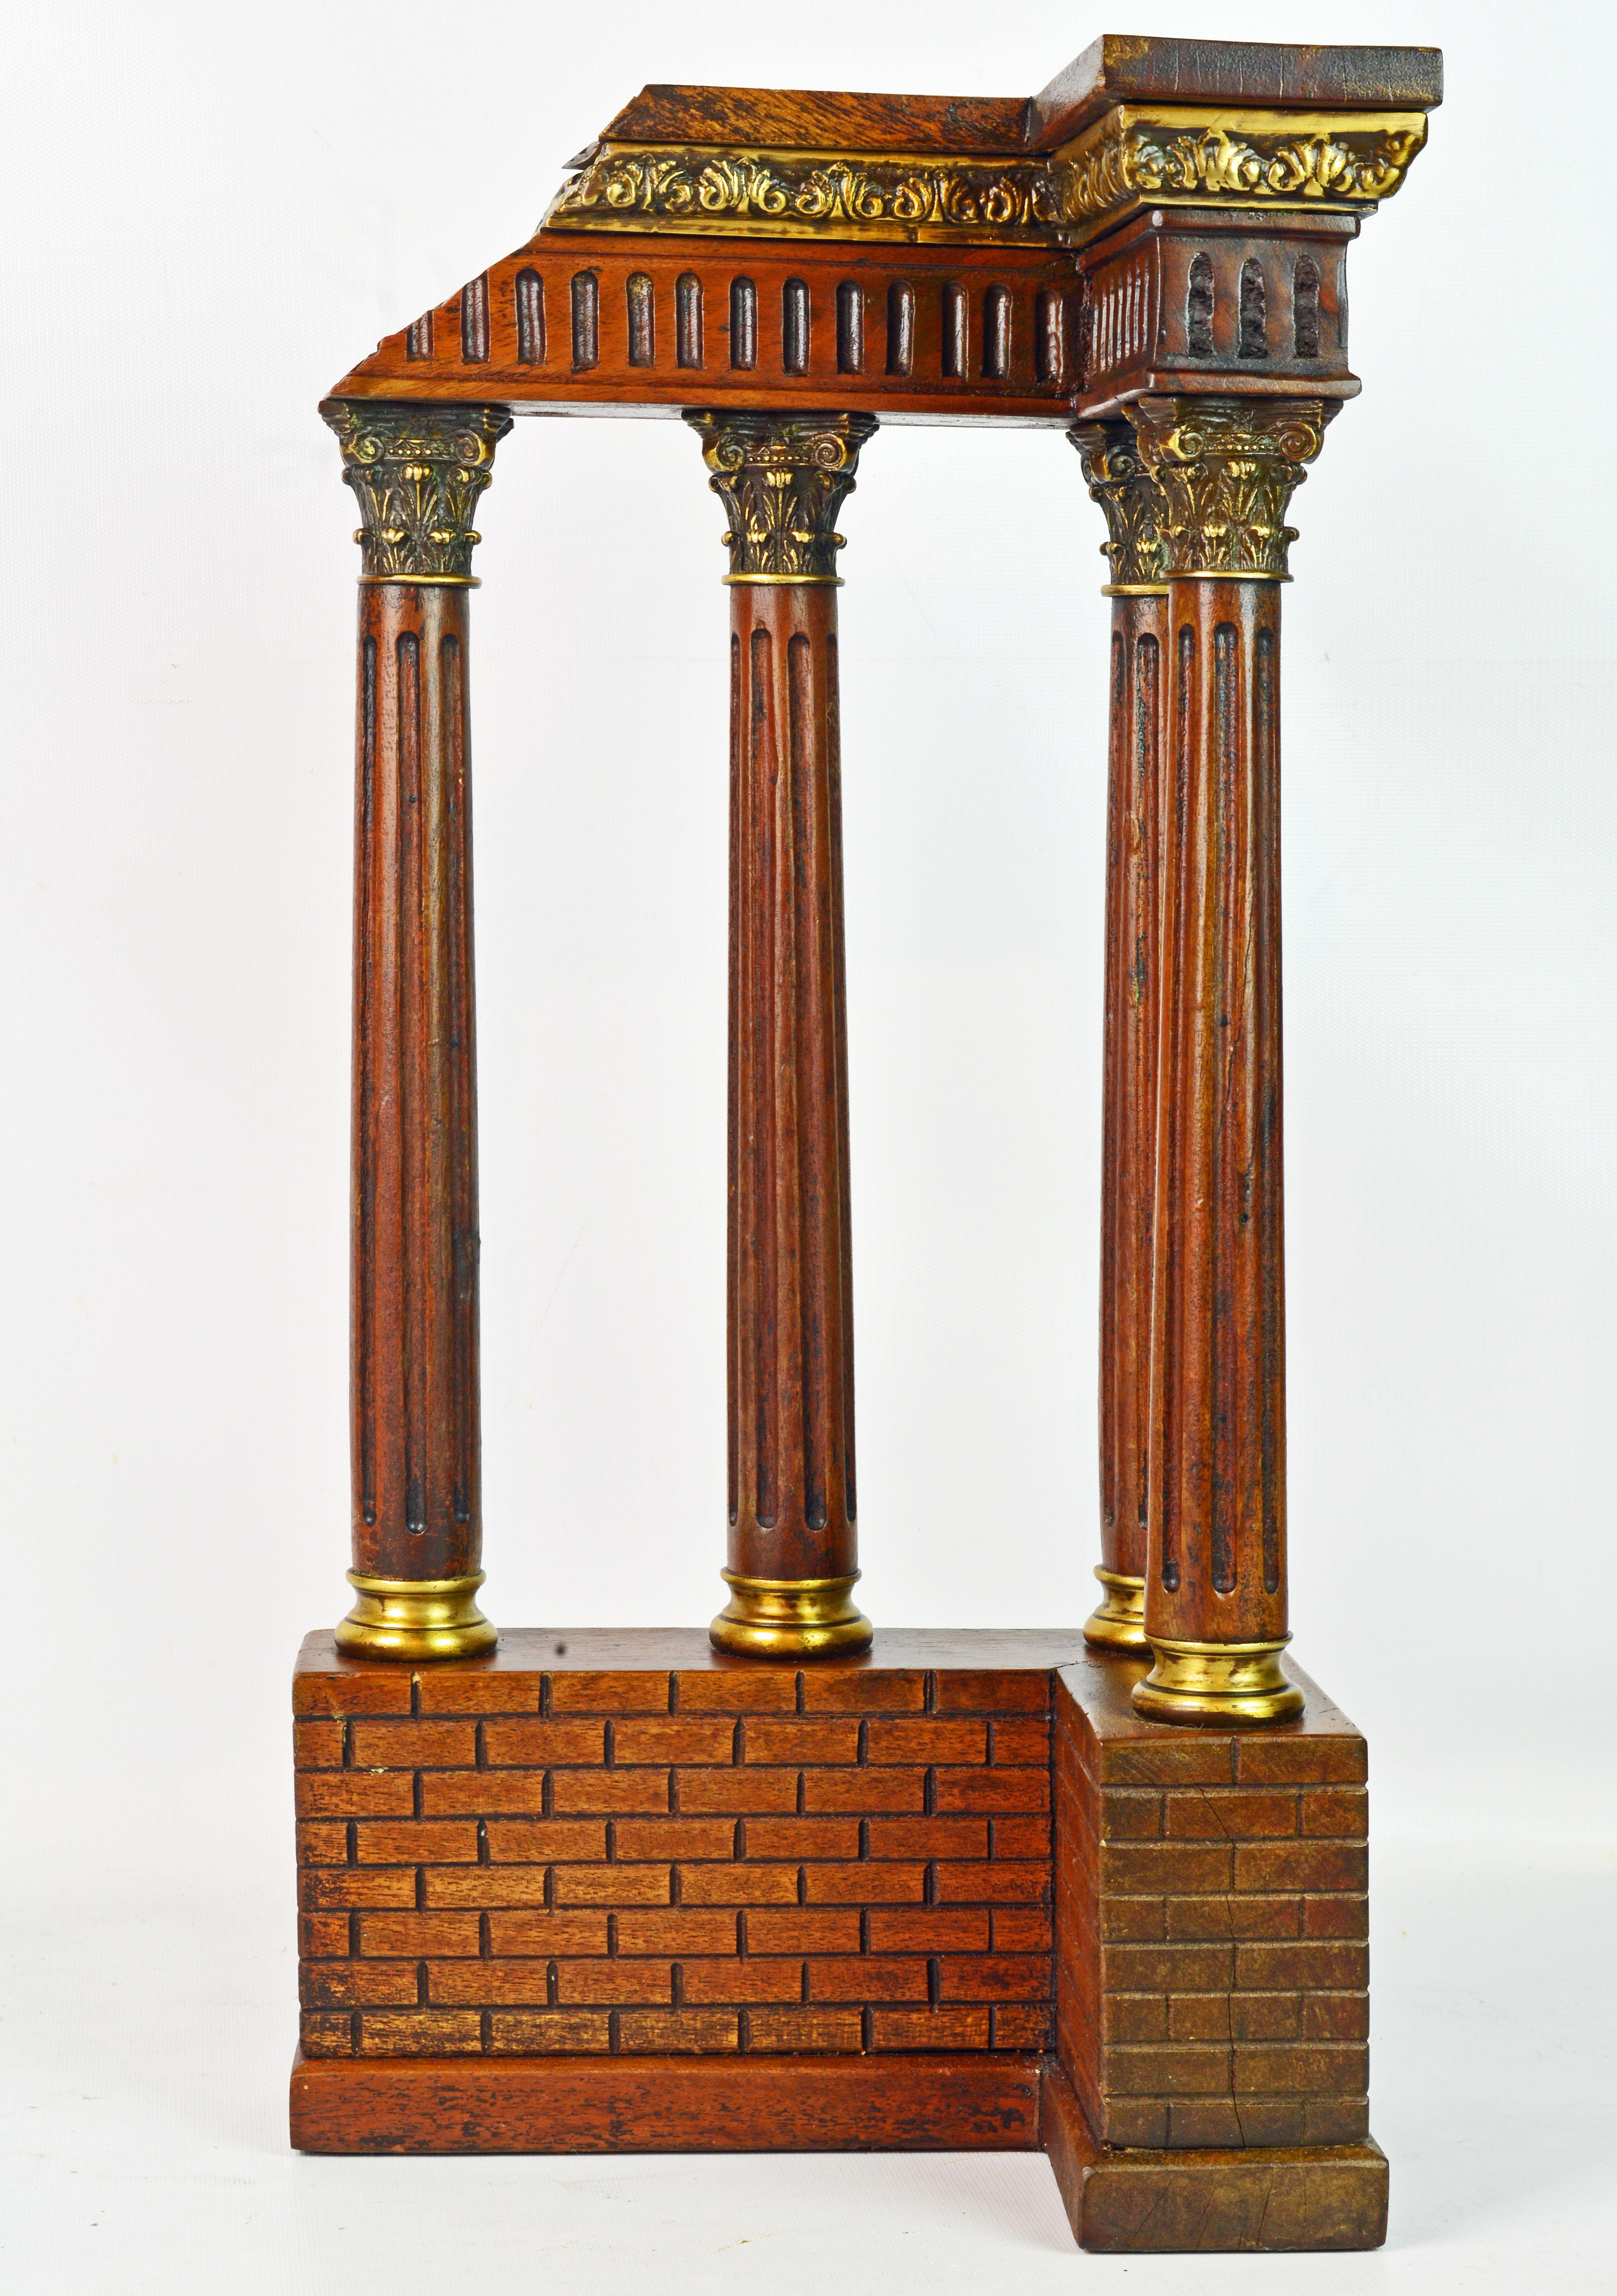 Standing 20.5 inches tall this Italian model of a temple fragment or ruin features a corner with four fluted Corinthian columns with bronze capitals and bases carrying an epistyle under a modeled bronze frieze. The columns rest on a simulated